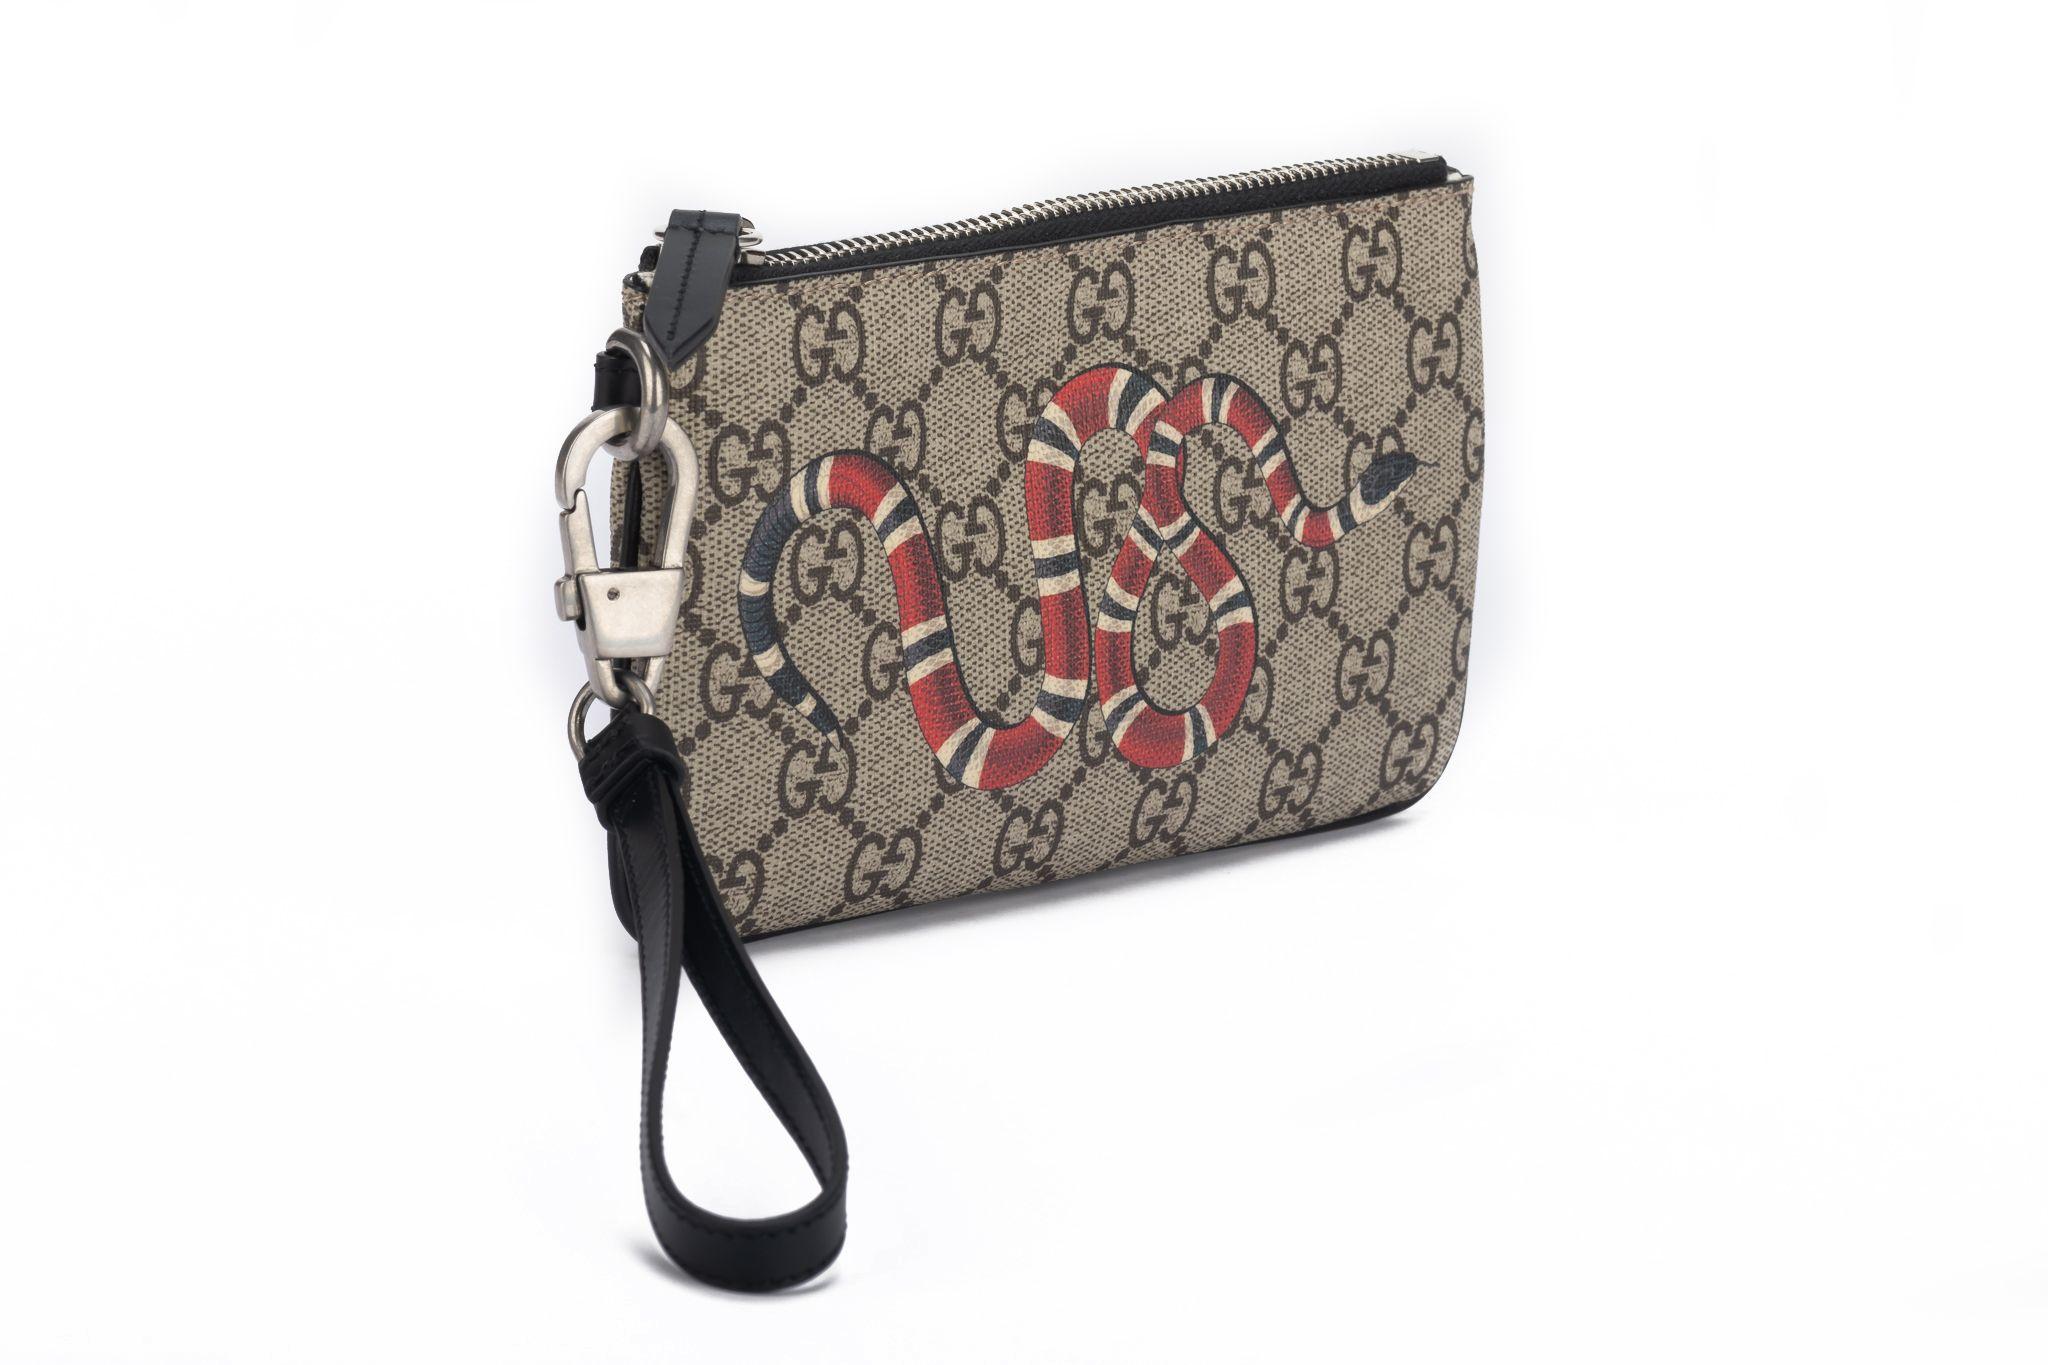 Gucci new brown coated monogram canvas wristlet with painted snake design, limited edition . Detachable handle. Comes with dust cover and original box.